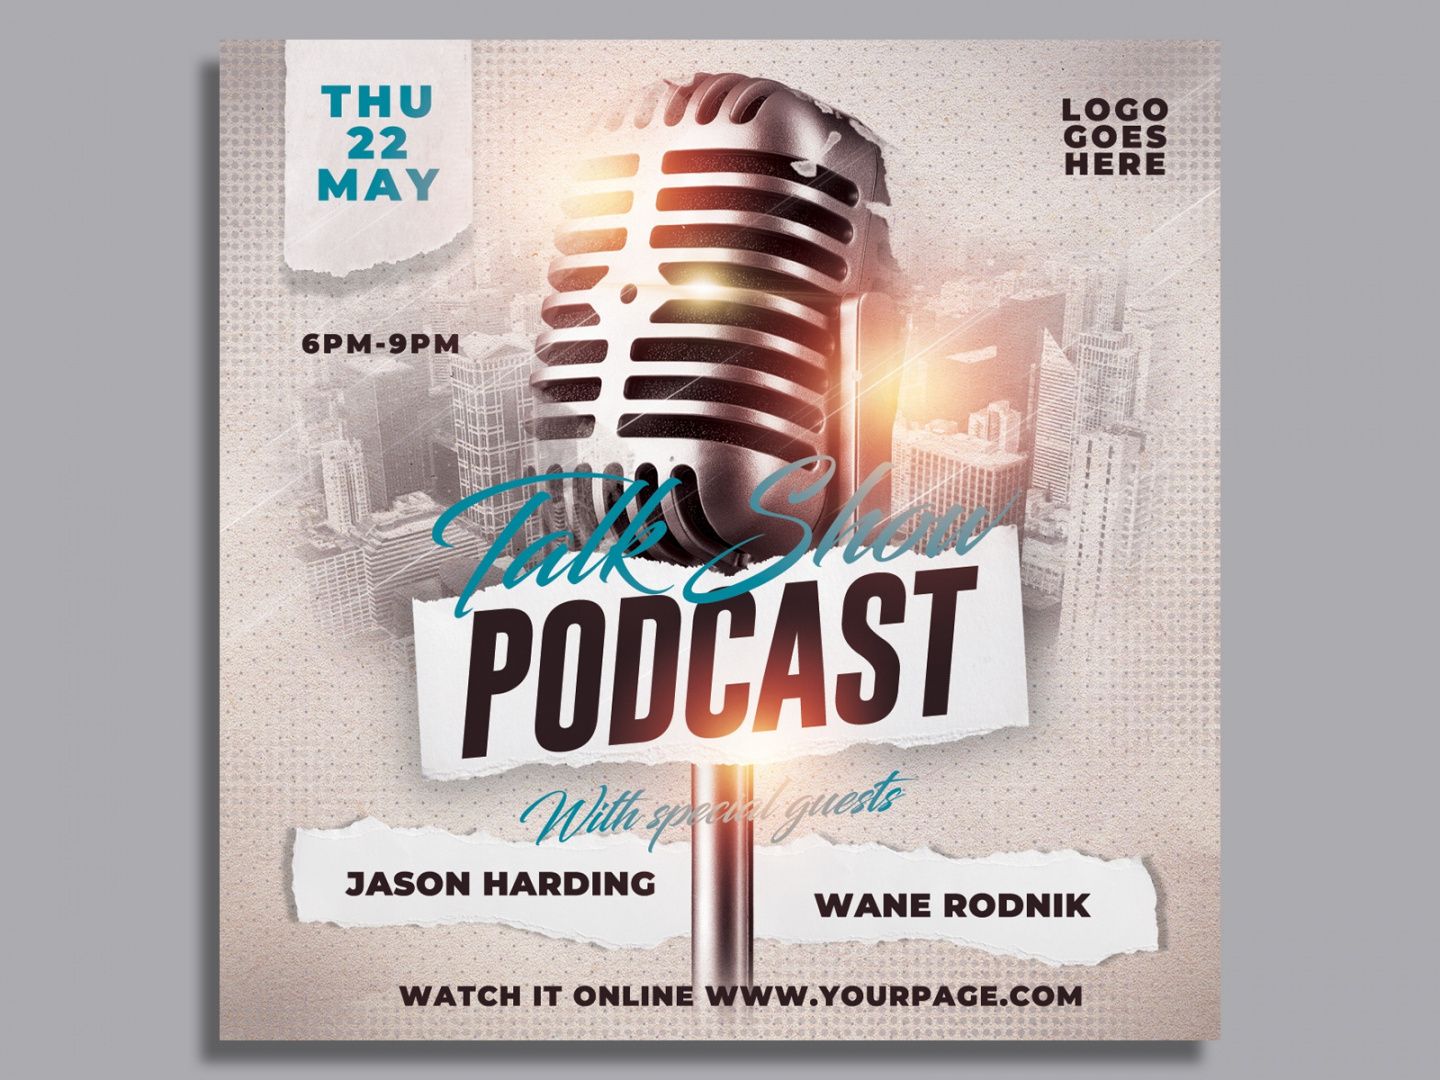 podcast talk show flyer template by hotpin on dribbble radio show flyer template doc